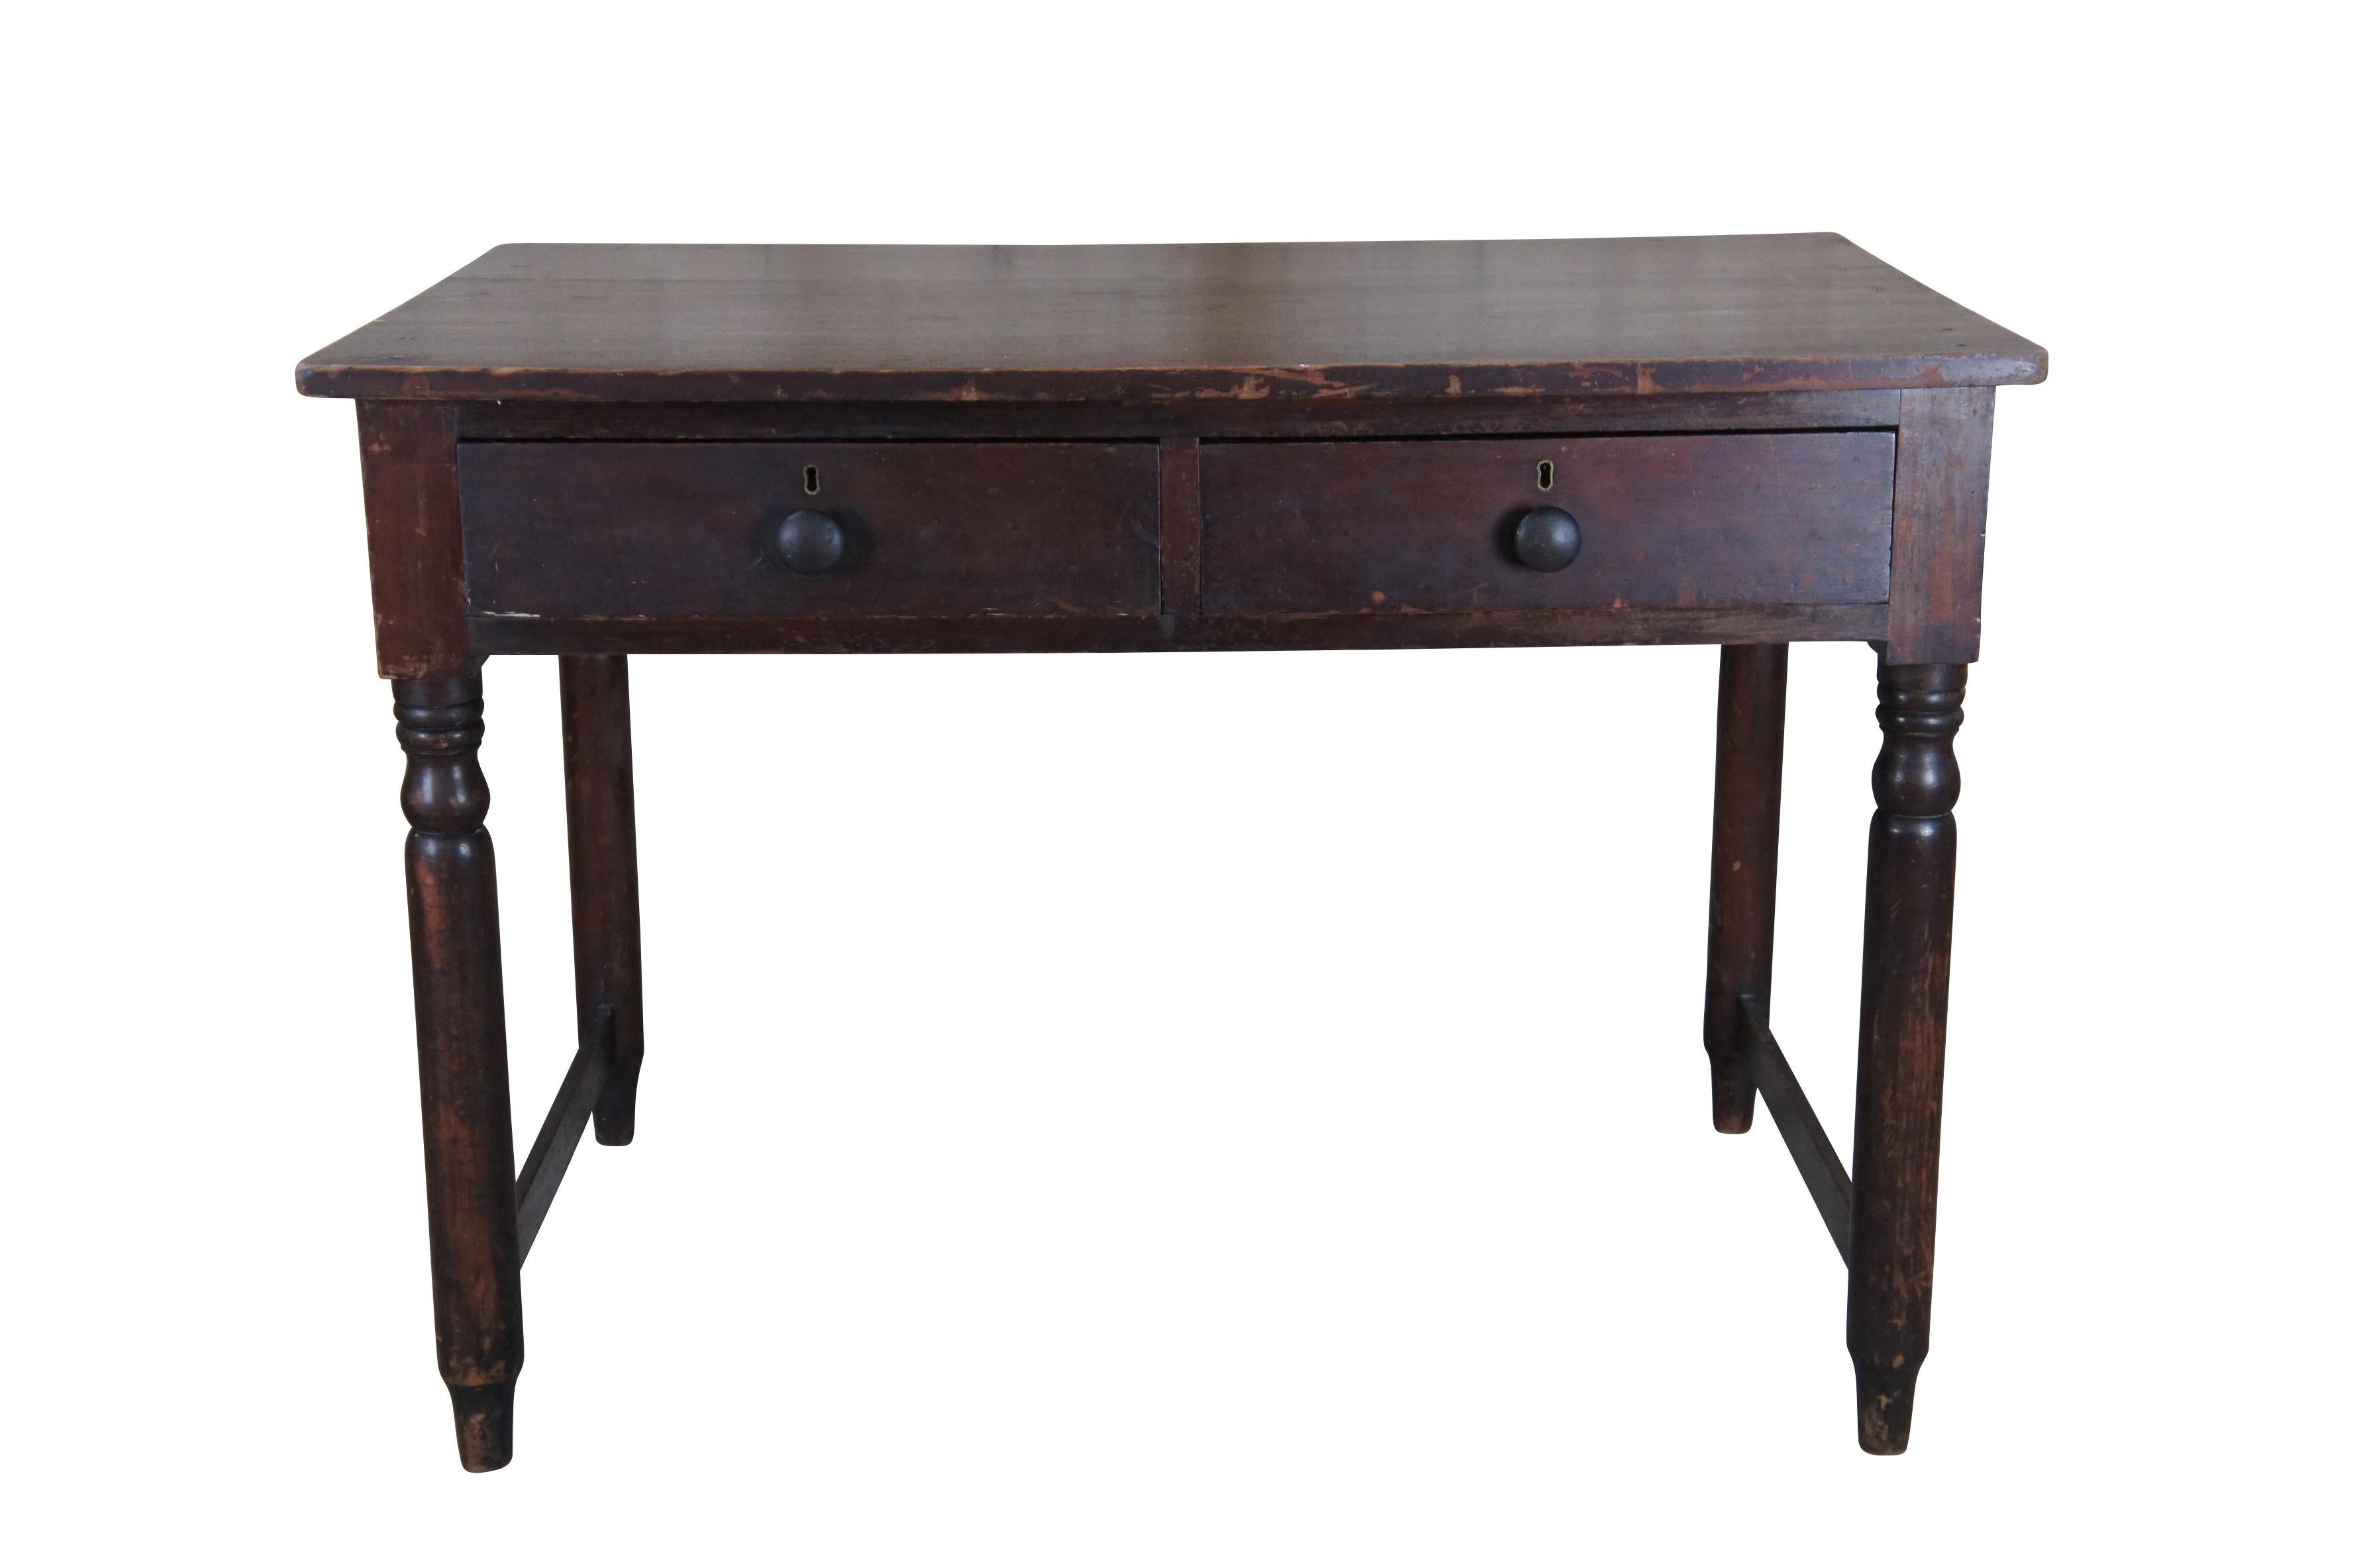 Antique primitive 19th century early American library writing desk.  Made of pine featuring rectangular form with two drawers featuring hand dovetailing, hand cut nails, and turned posts connected by stretcher.

Dimensions: 
43 1/2